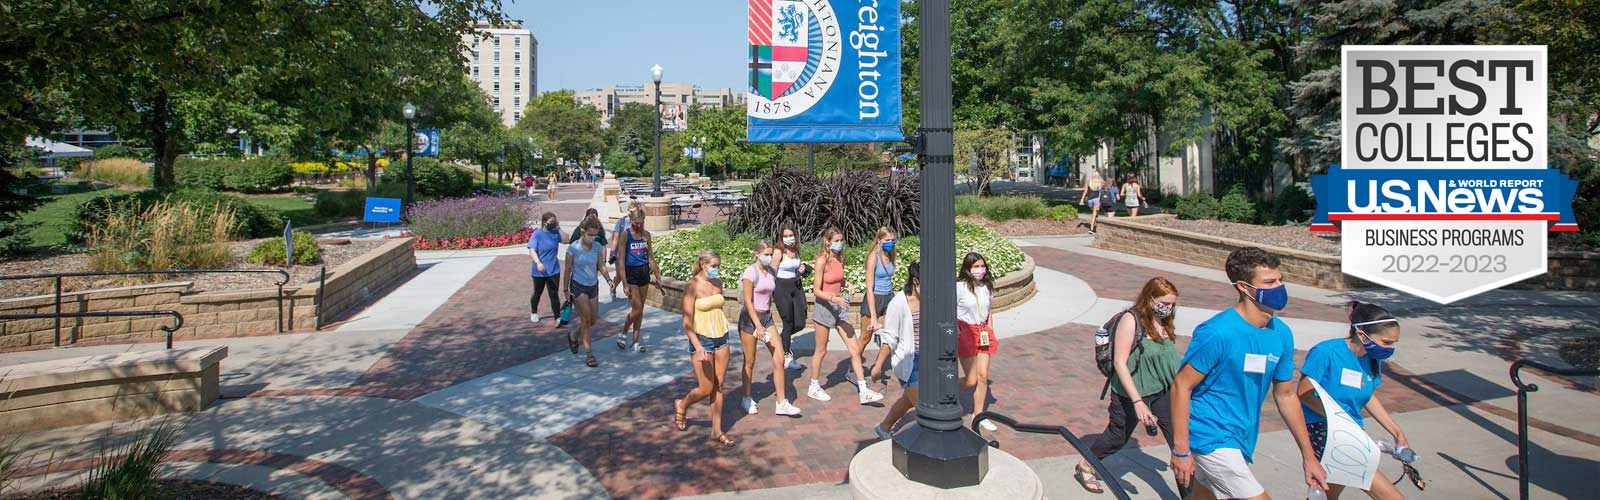 Students walking across campus with the U.S. News & World Report Best Colleges - Business Programs 2022-2023 badge overlaid